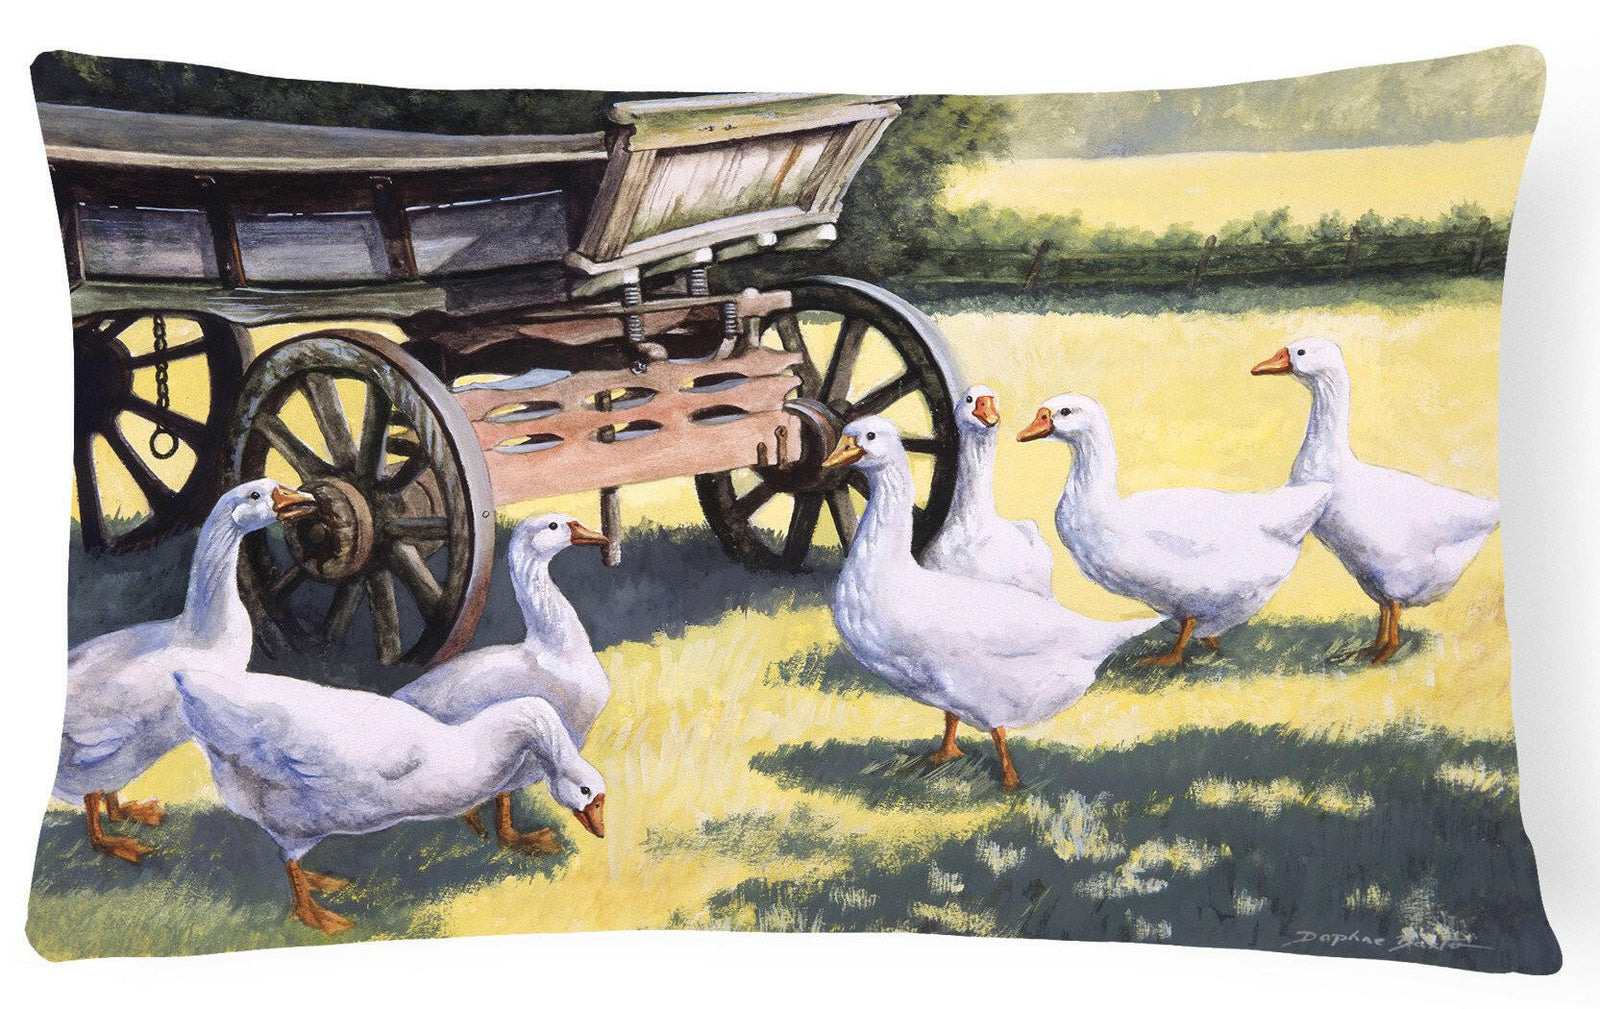 Geese by Daphne Baxter Fabric Decorative Pillow BDBA0234PW1216 by Caroline's Treasures